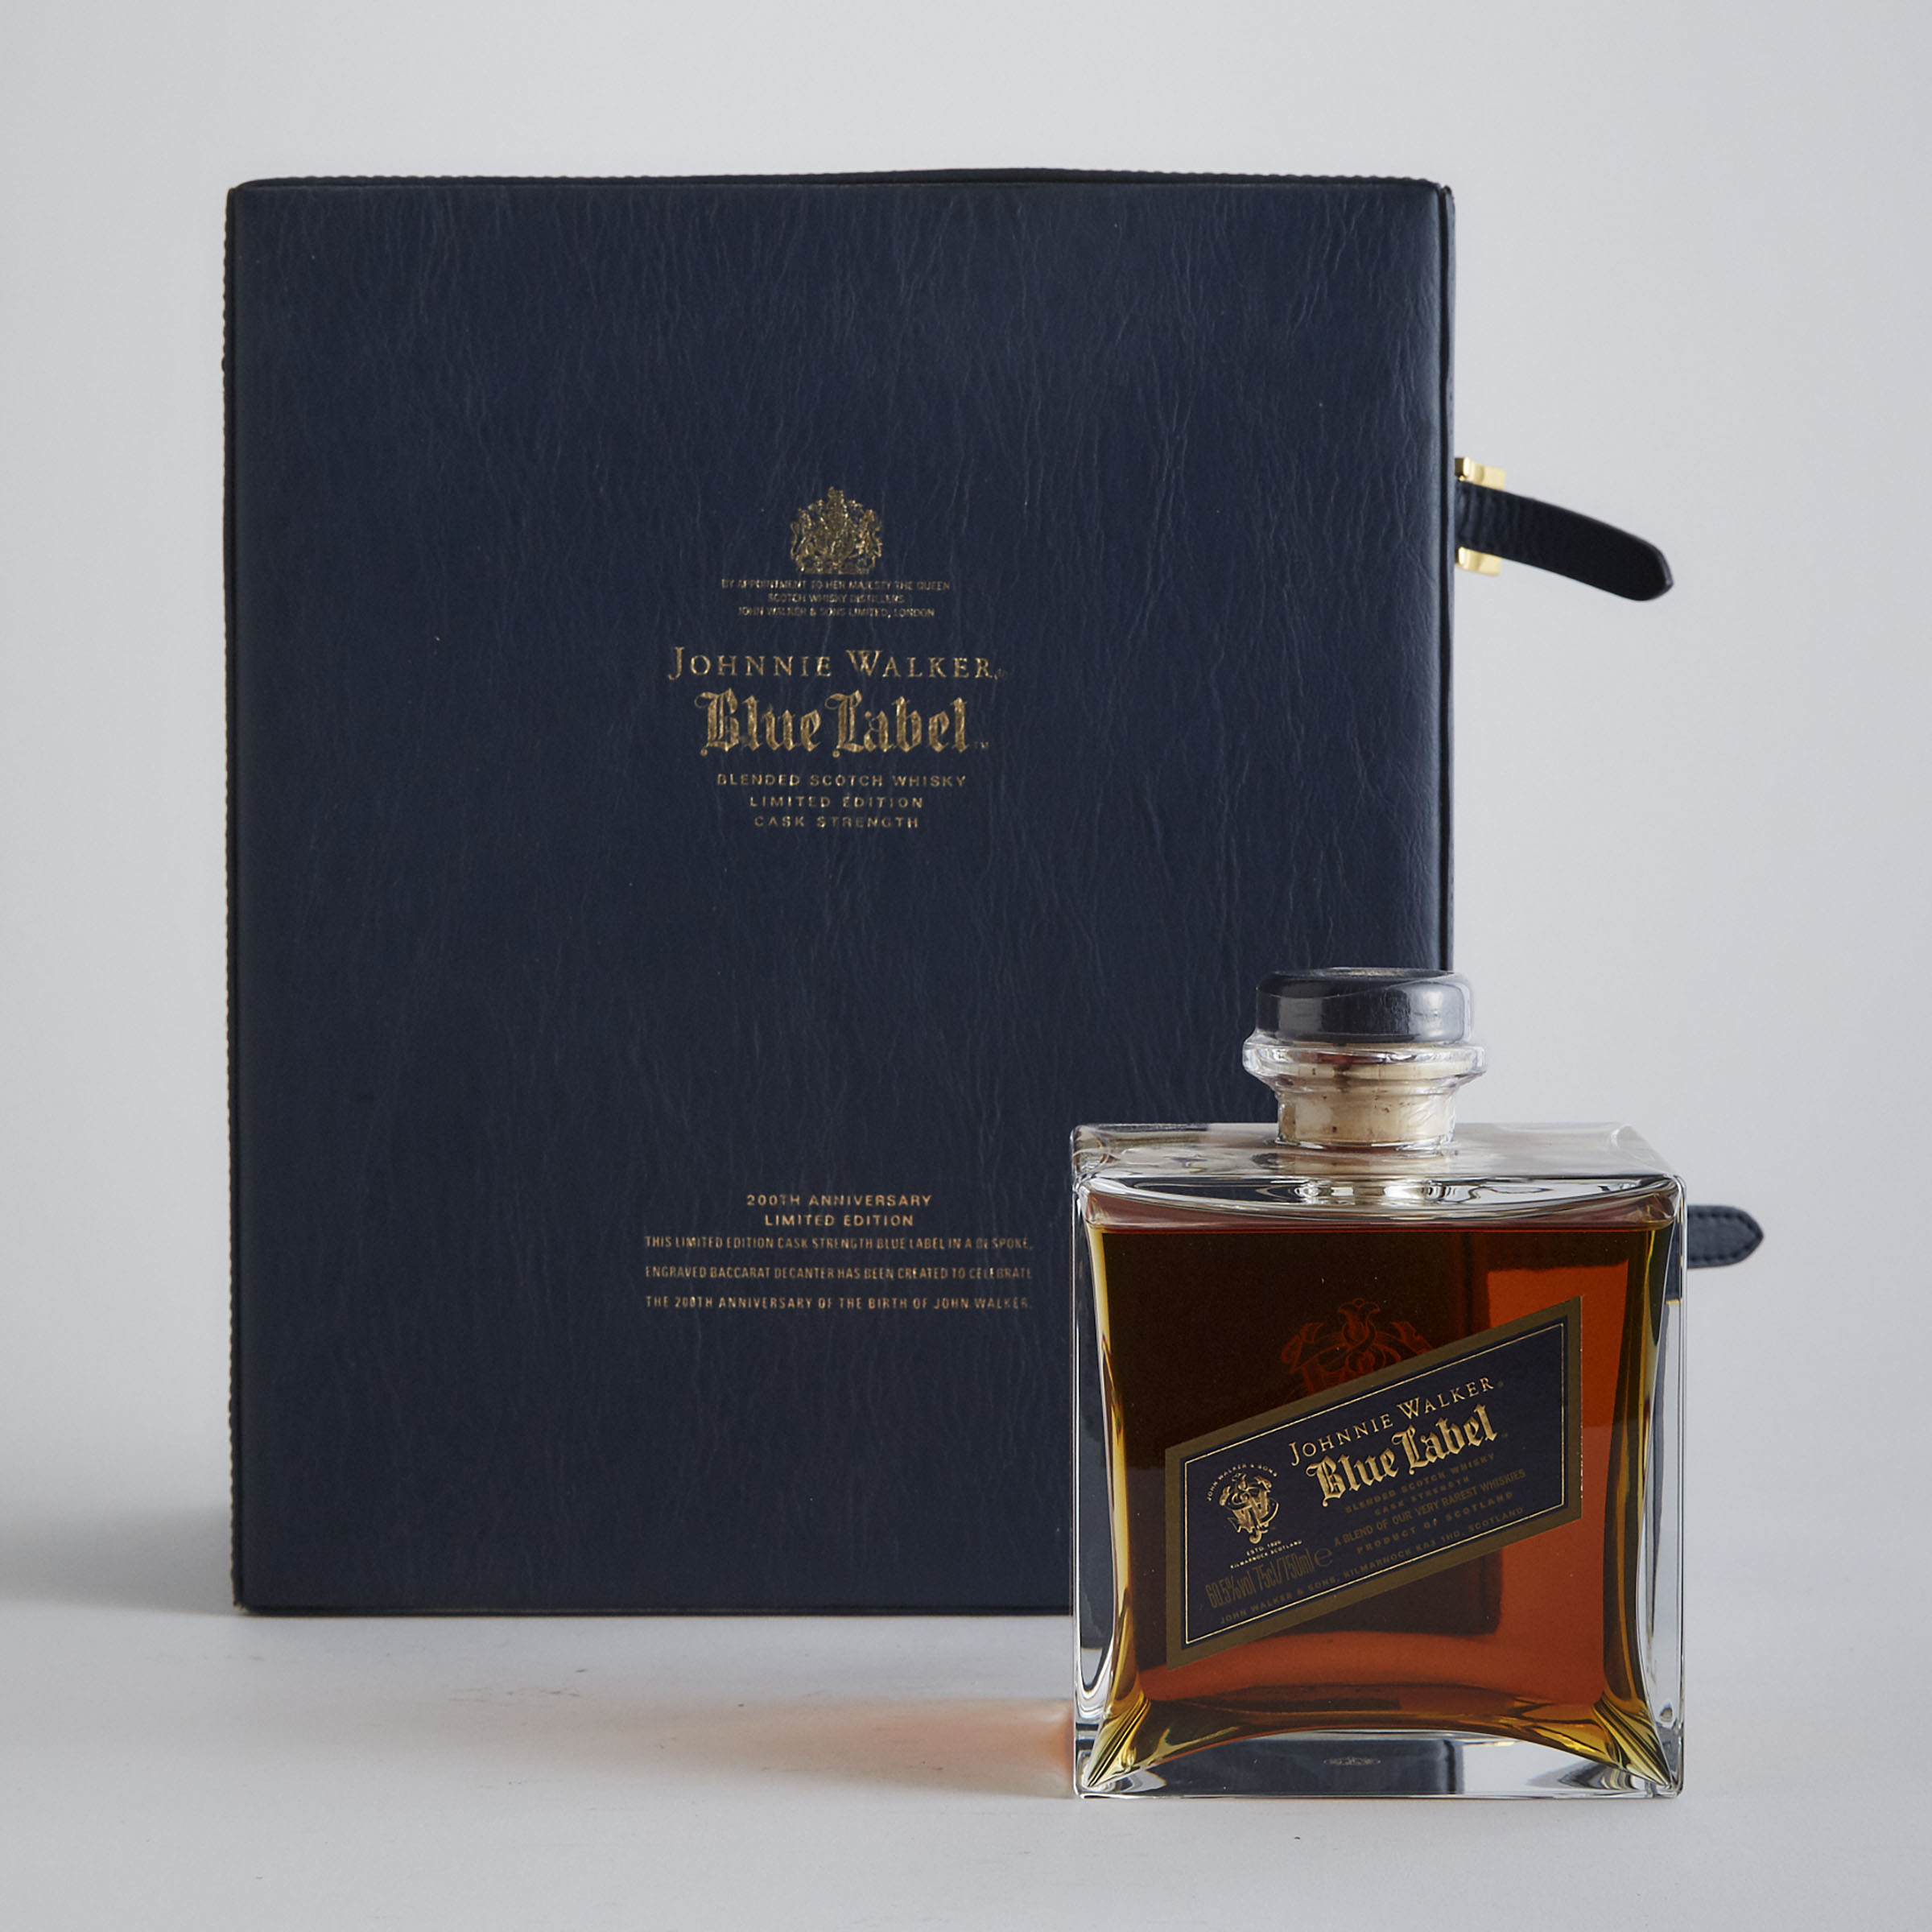 JOHNNIE WALKER BLUE LABEL BLENDED WHISKY 200TH ANNIVERSARY EDITION NAS (ONE 750 ML)